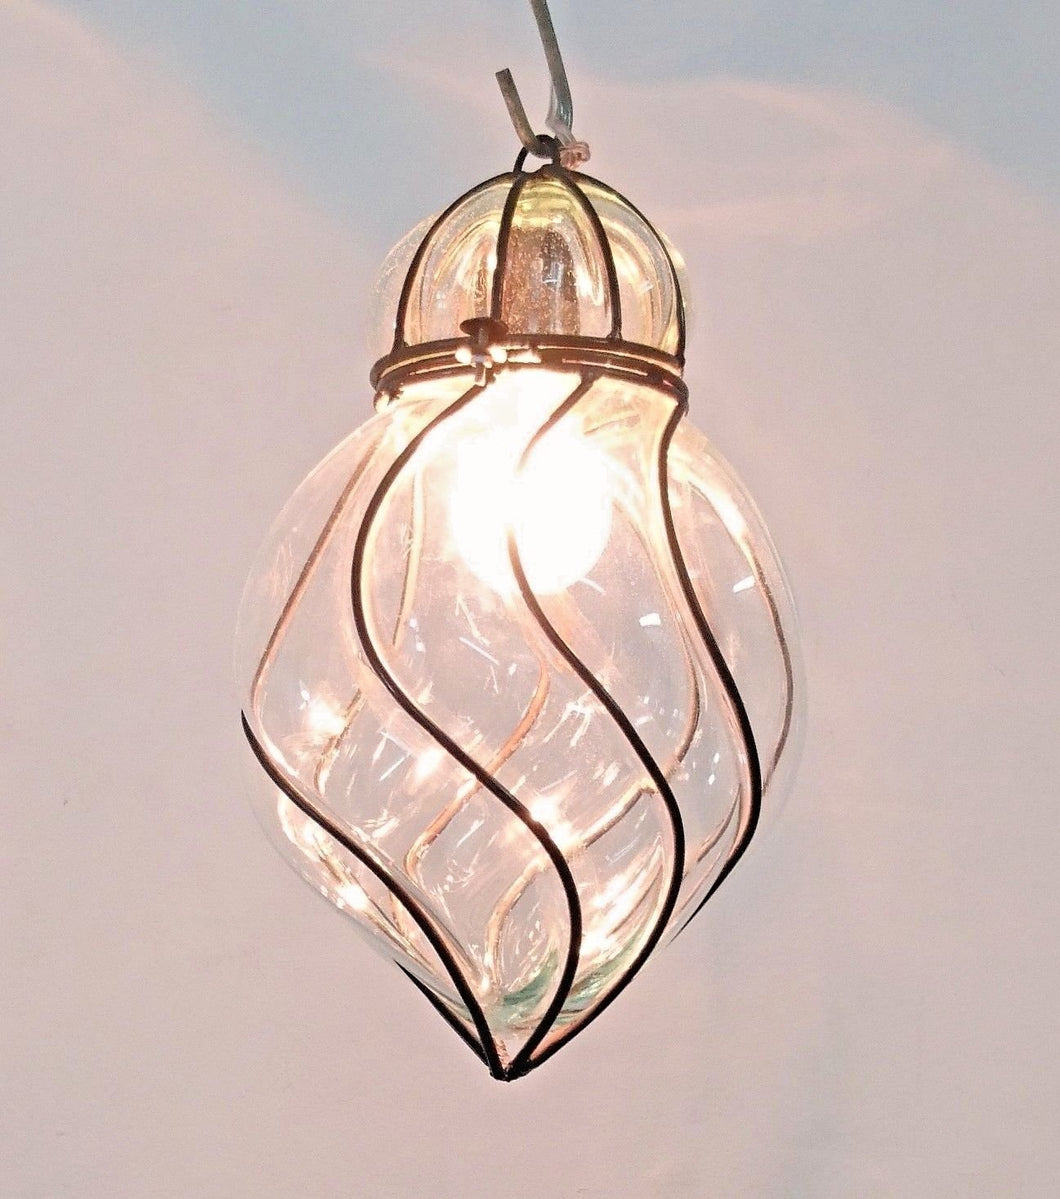 B277 Mouth-Blown Clear Glass Spiral Wrought Iron Hanging Lamp